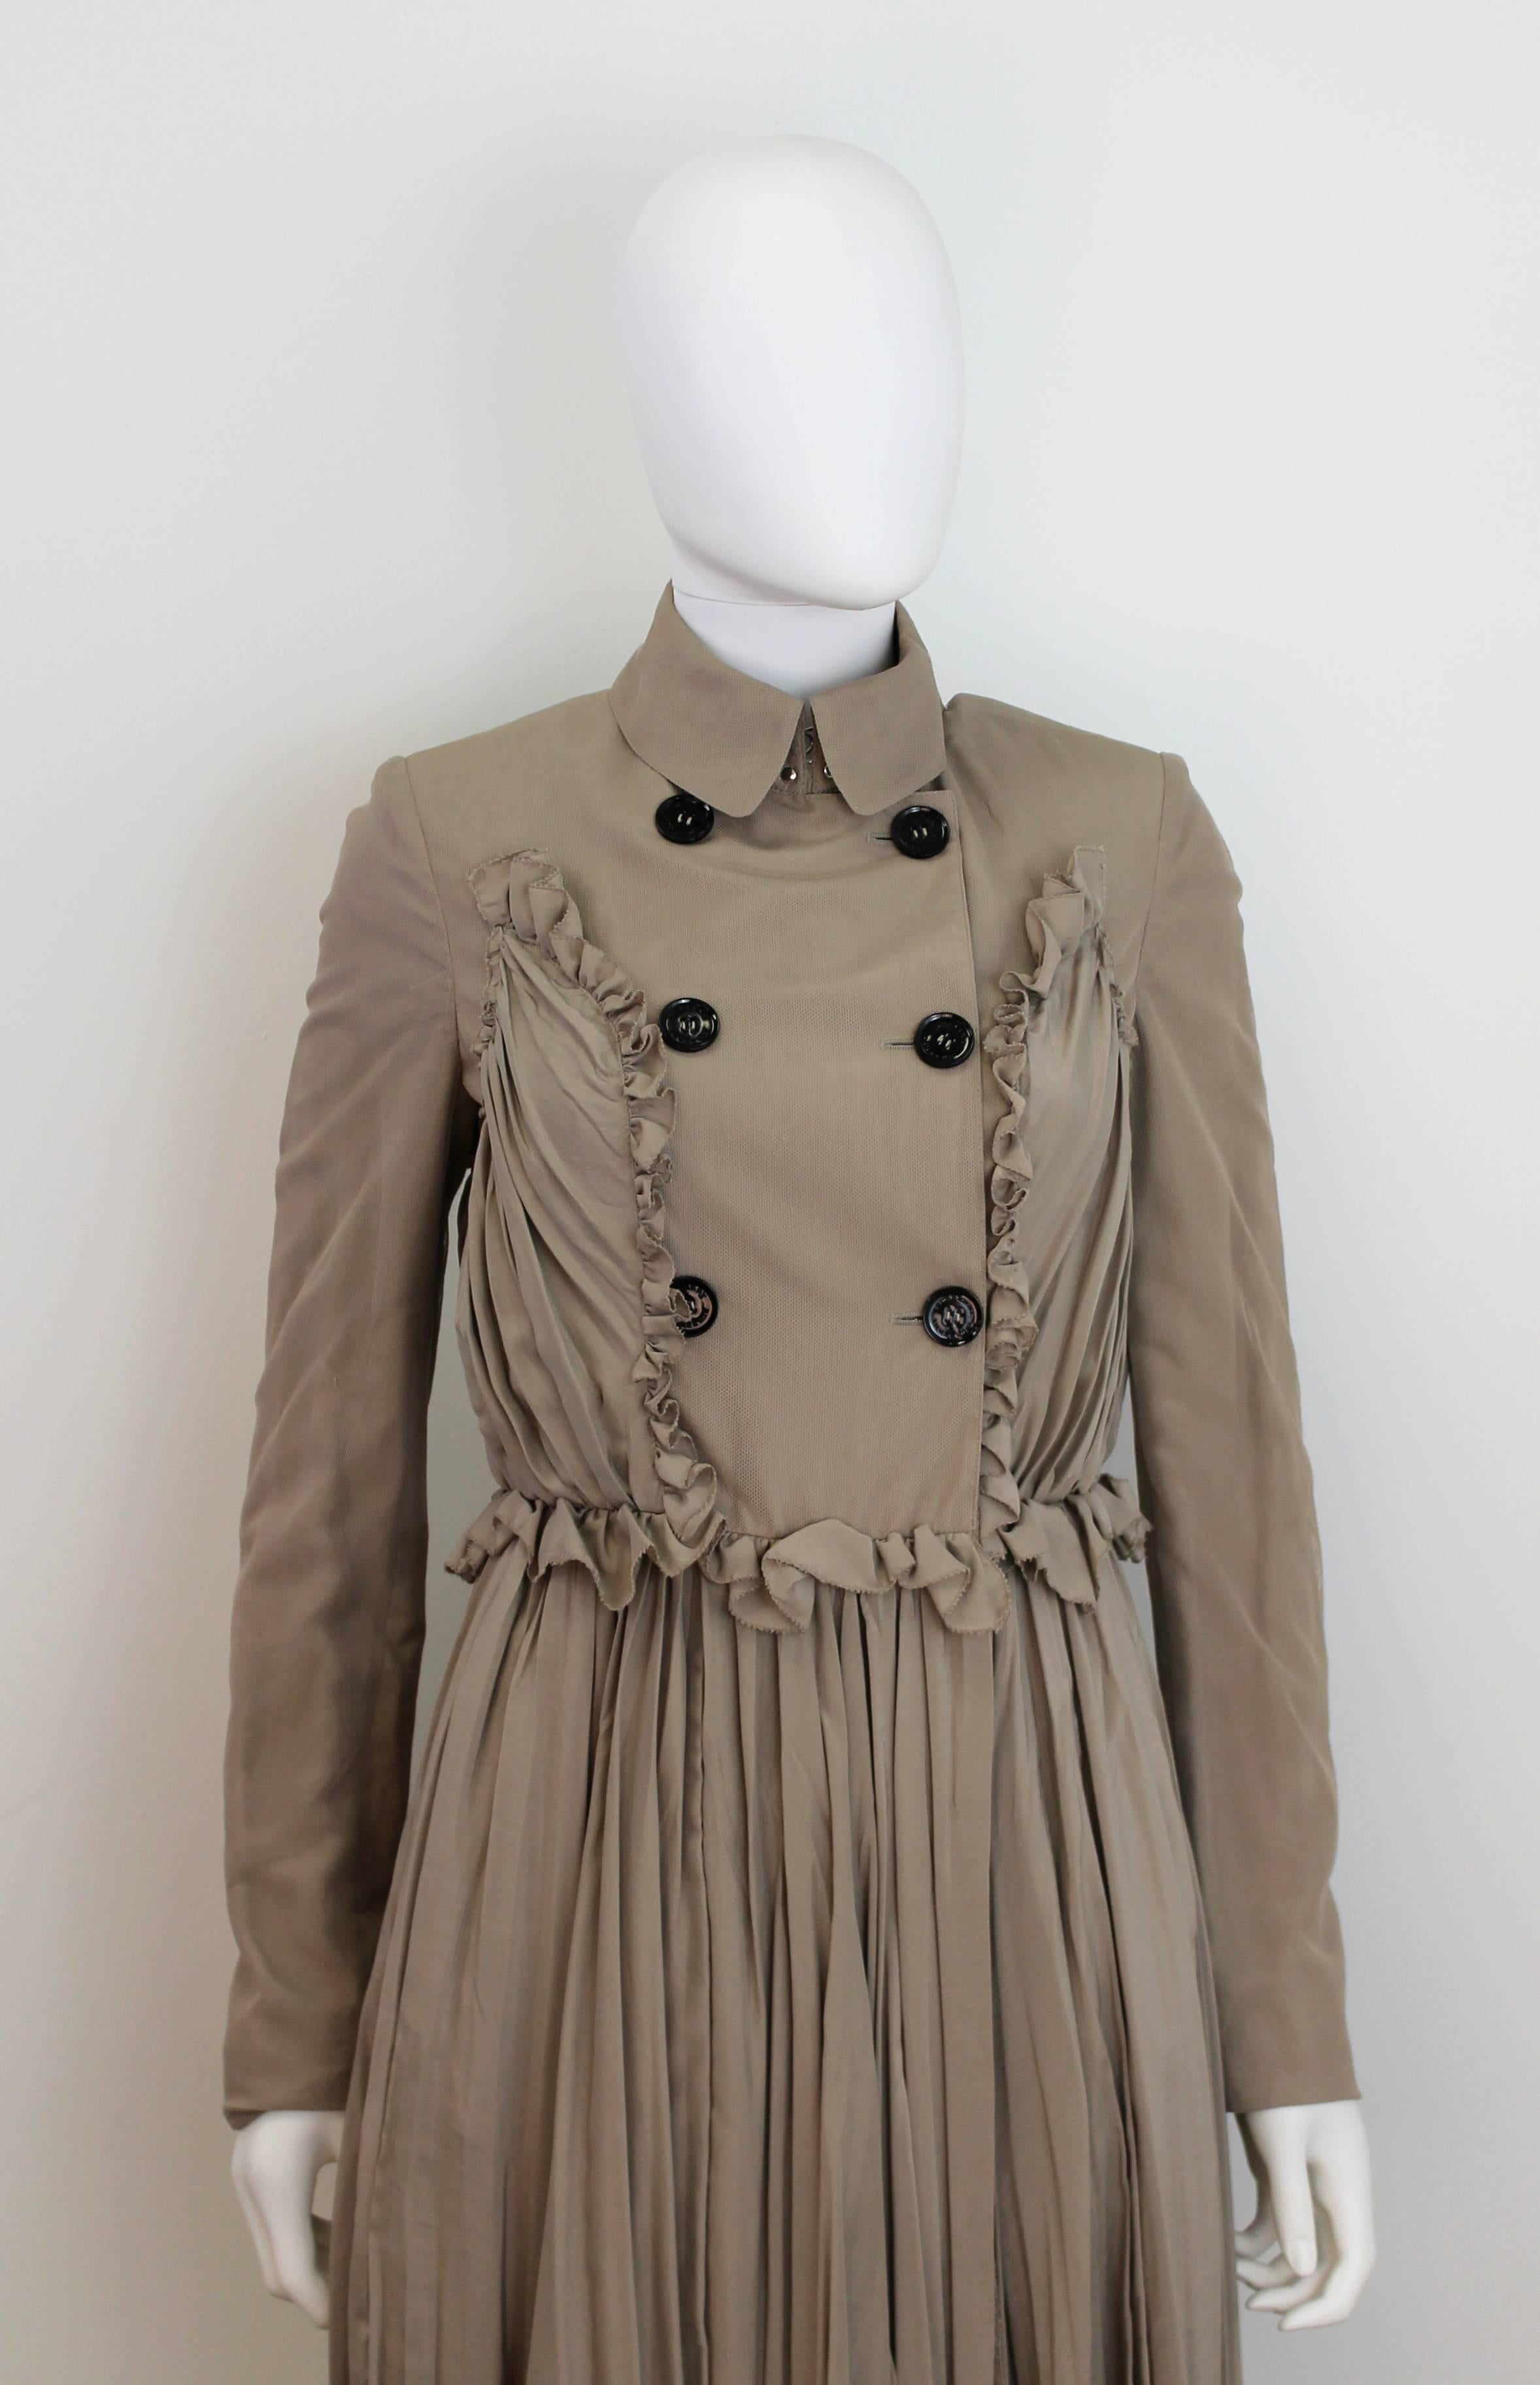 Burberry Prorsum 2010 Silk Coat-Dress with Full Pleated Skirt and Tulle Overlay In New Condition For Sale In London, GB